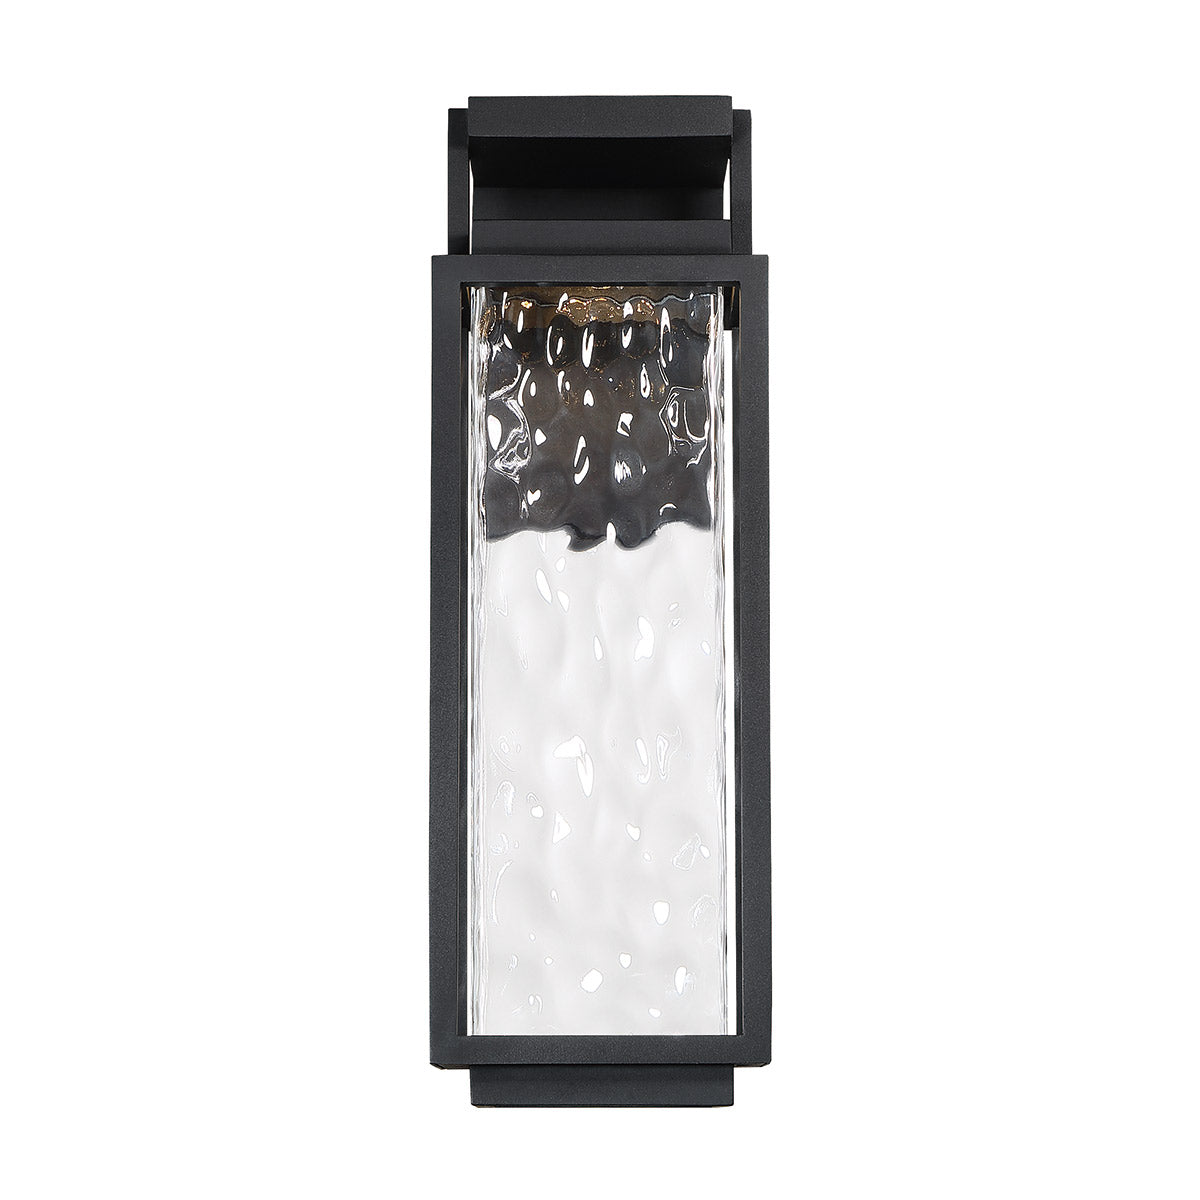 Two if By Sea 25" Indoor/Outdoor Wall Light